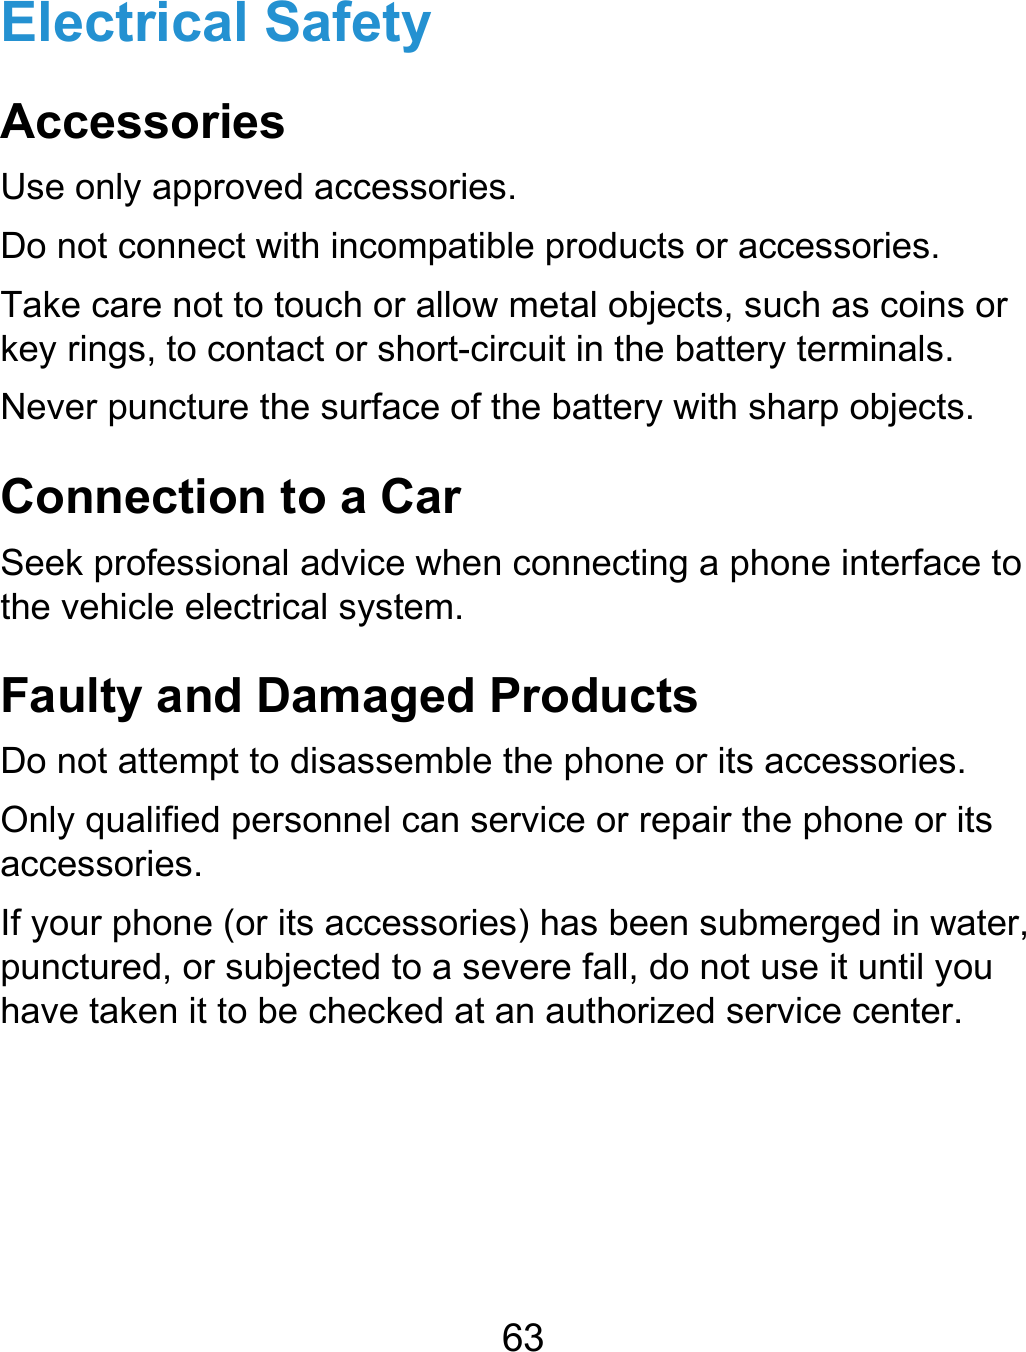  63 Electrical Safety Accessories Use only approved accessories. Do not connect with incompatible products or accessories. Take care not to touch or allow metal objects, such as coins or key rings, to contact or short-circuit in the battery terminals. Never puncture the surface of the battery with sharp objects. Connection to a Car Seek professional advice when connecting a phone interface to the vehicle electrical system. Faulty and Damaged Products Do not attempt to disassemble the phone or its accessories. Only qualified personnel can service or repair the phone or its accessories. If your phone (or its accessories) has been submerged in water, punctured, or subjected to a severe fall, do not use it until you have taken it to be checked at an authorized service center.  